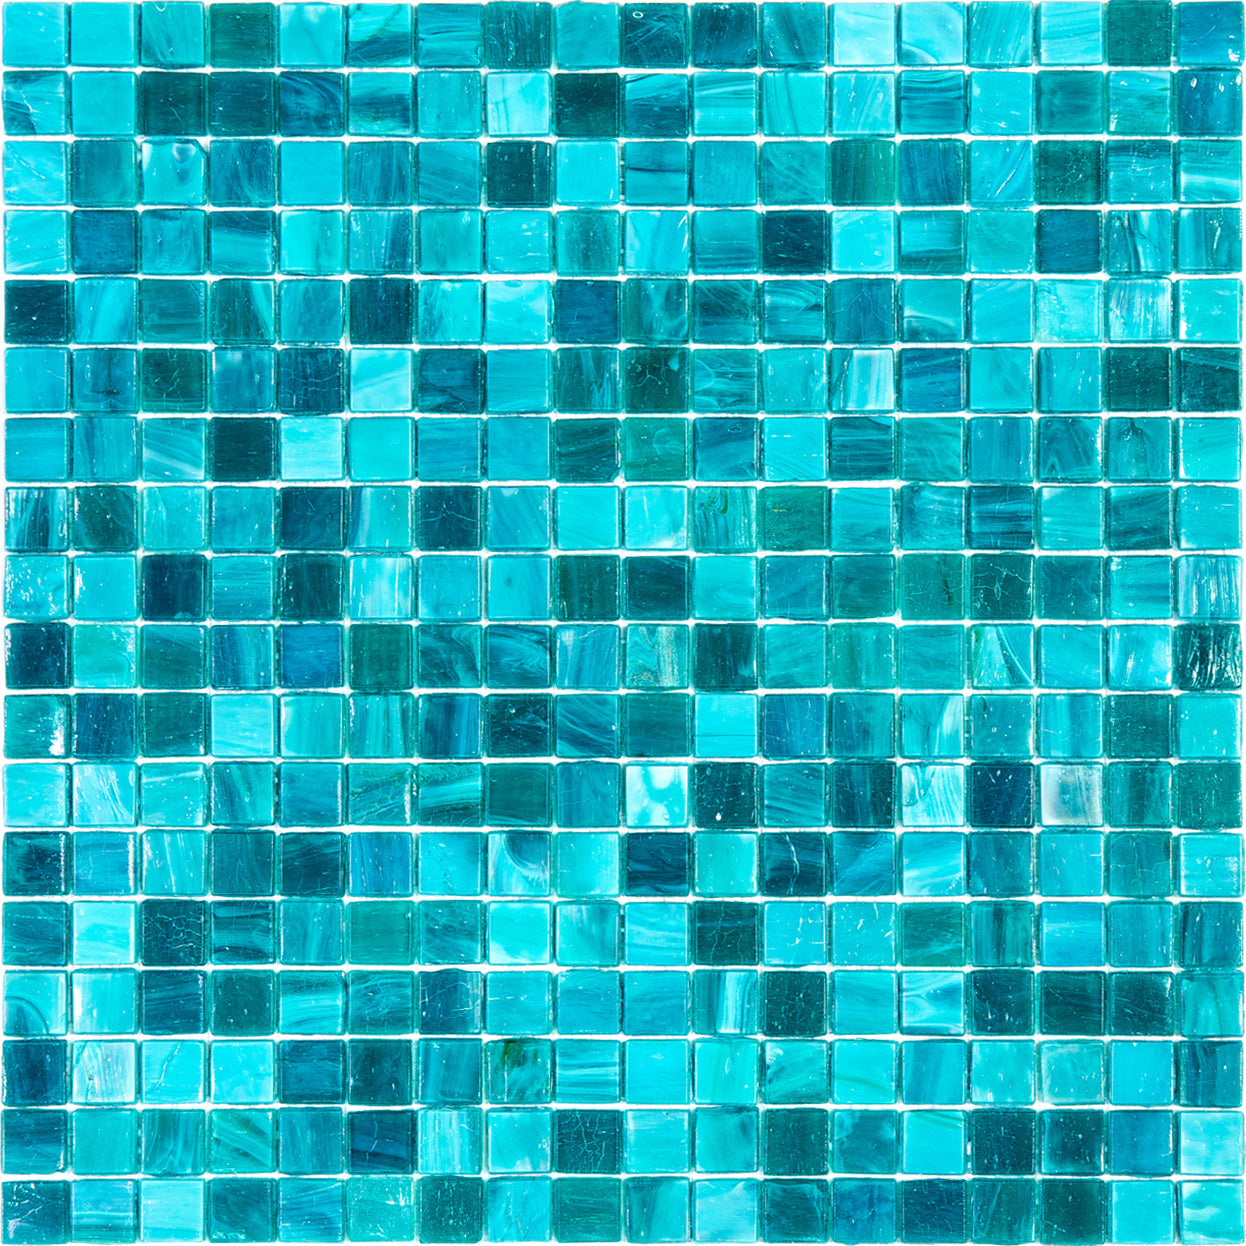 mir alma solid colors 0_6 inch nibble mn659 wall and floor mosaic distributed by surface group natural materials